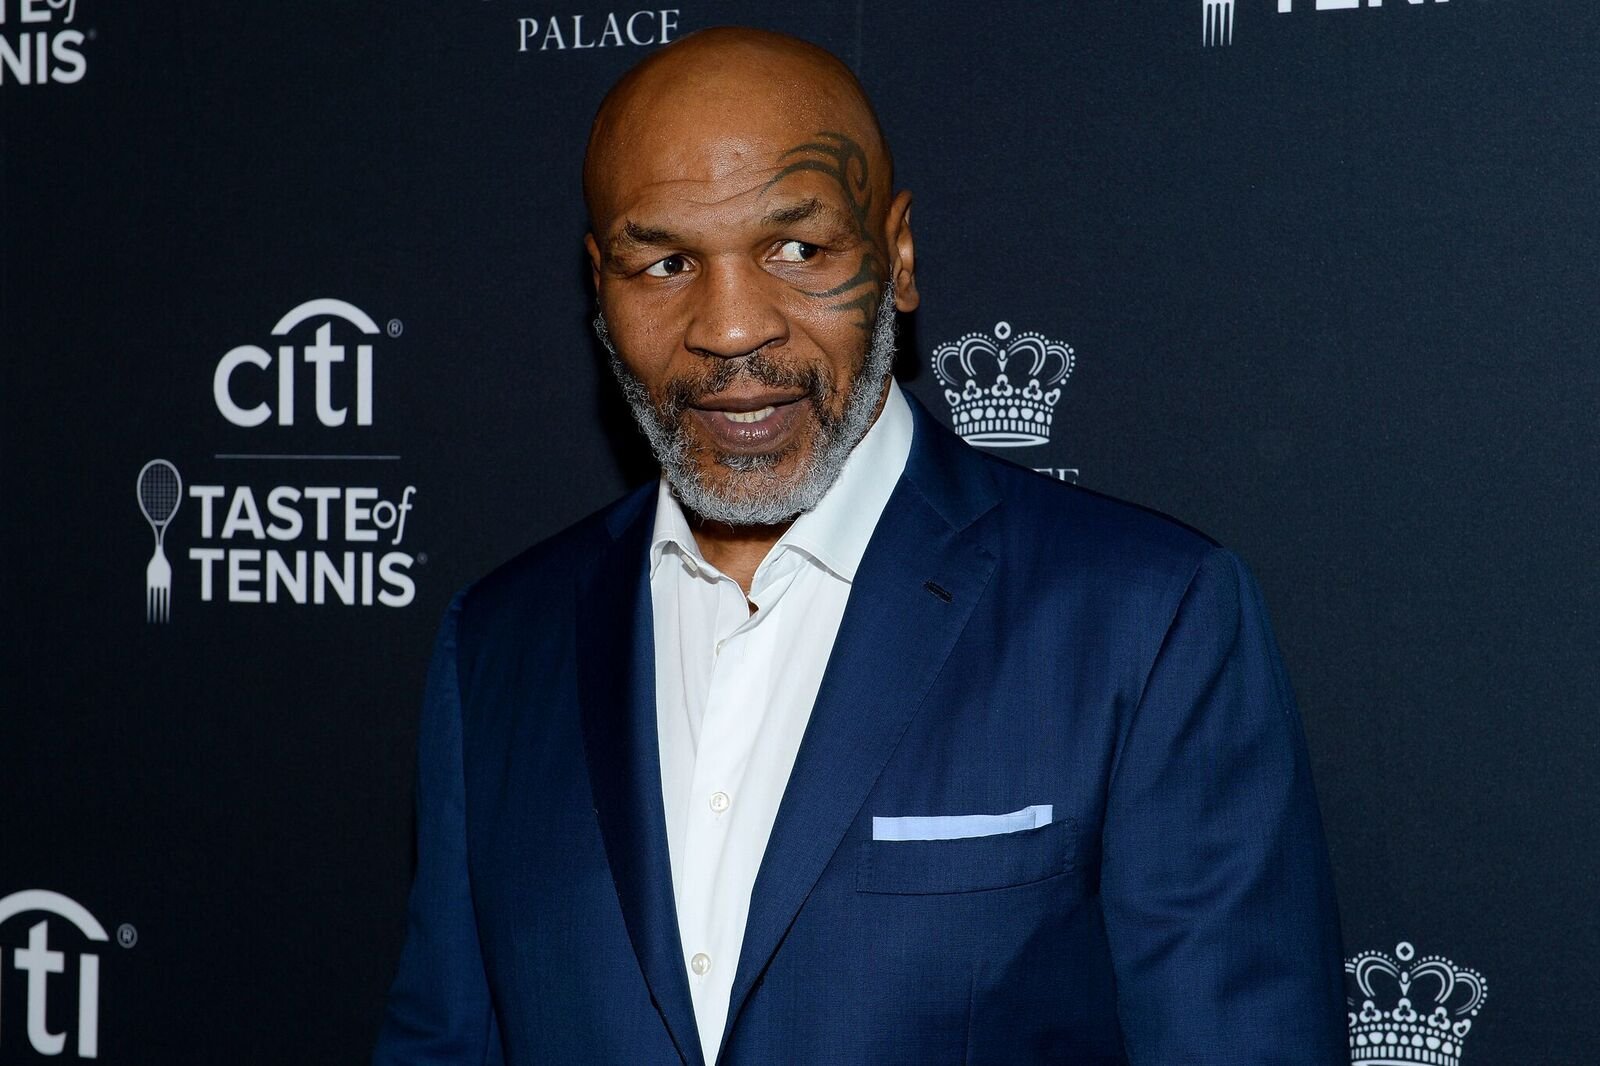 Mike Tyson attends the Citi Taste Of Tennis on August 22, 2019 in New York City. | Photo: Getty Images